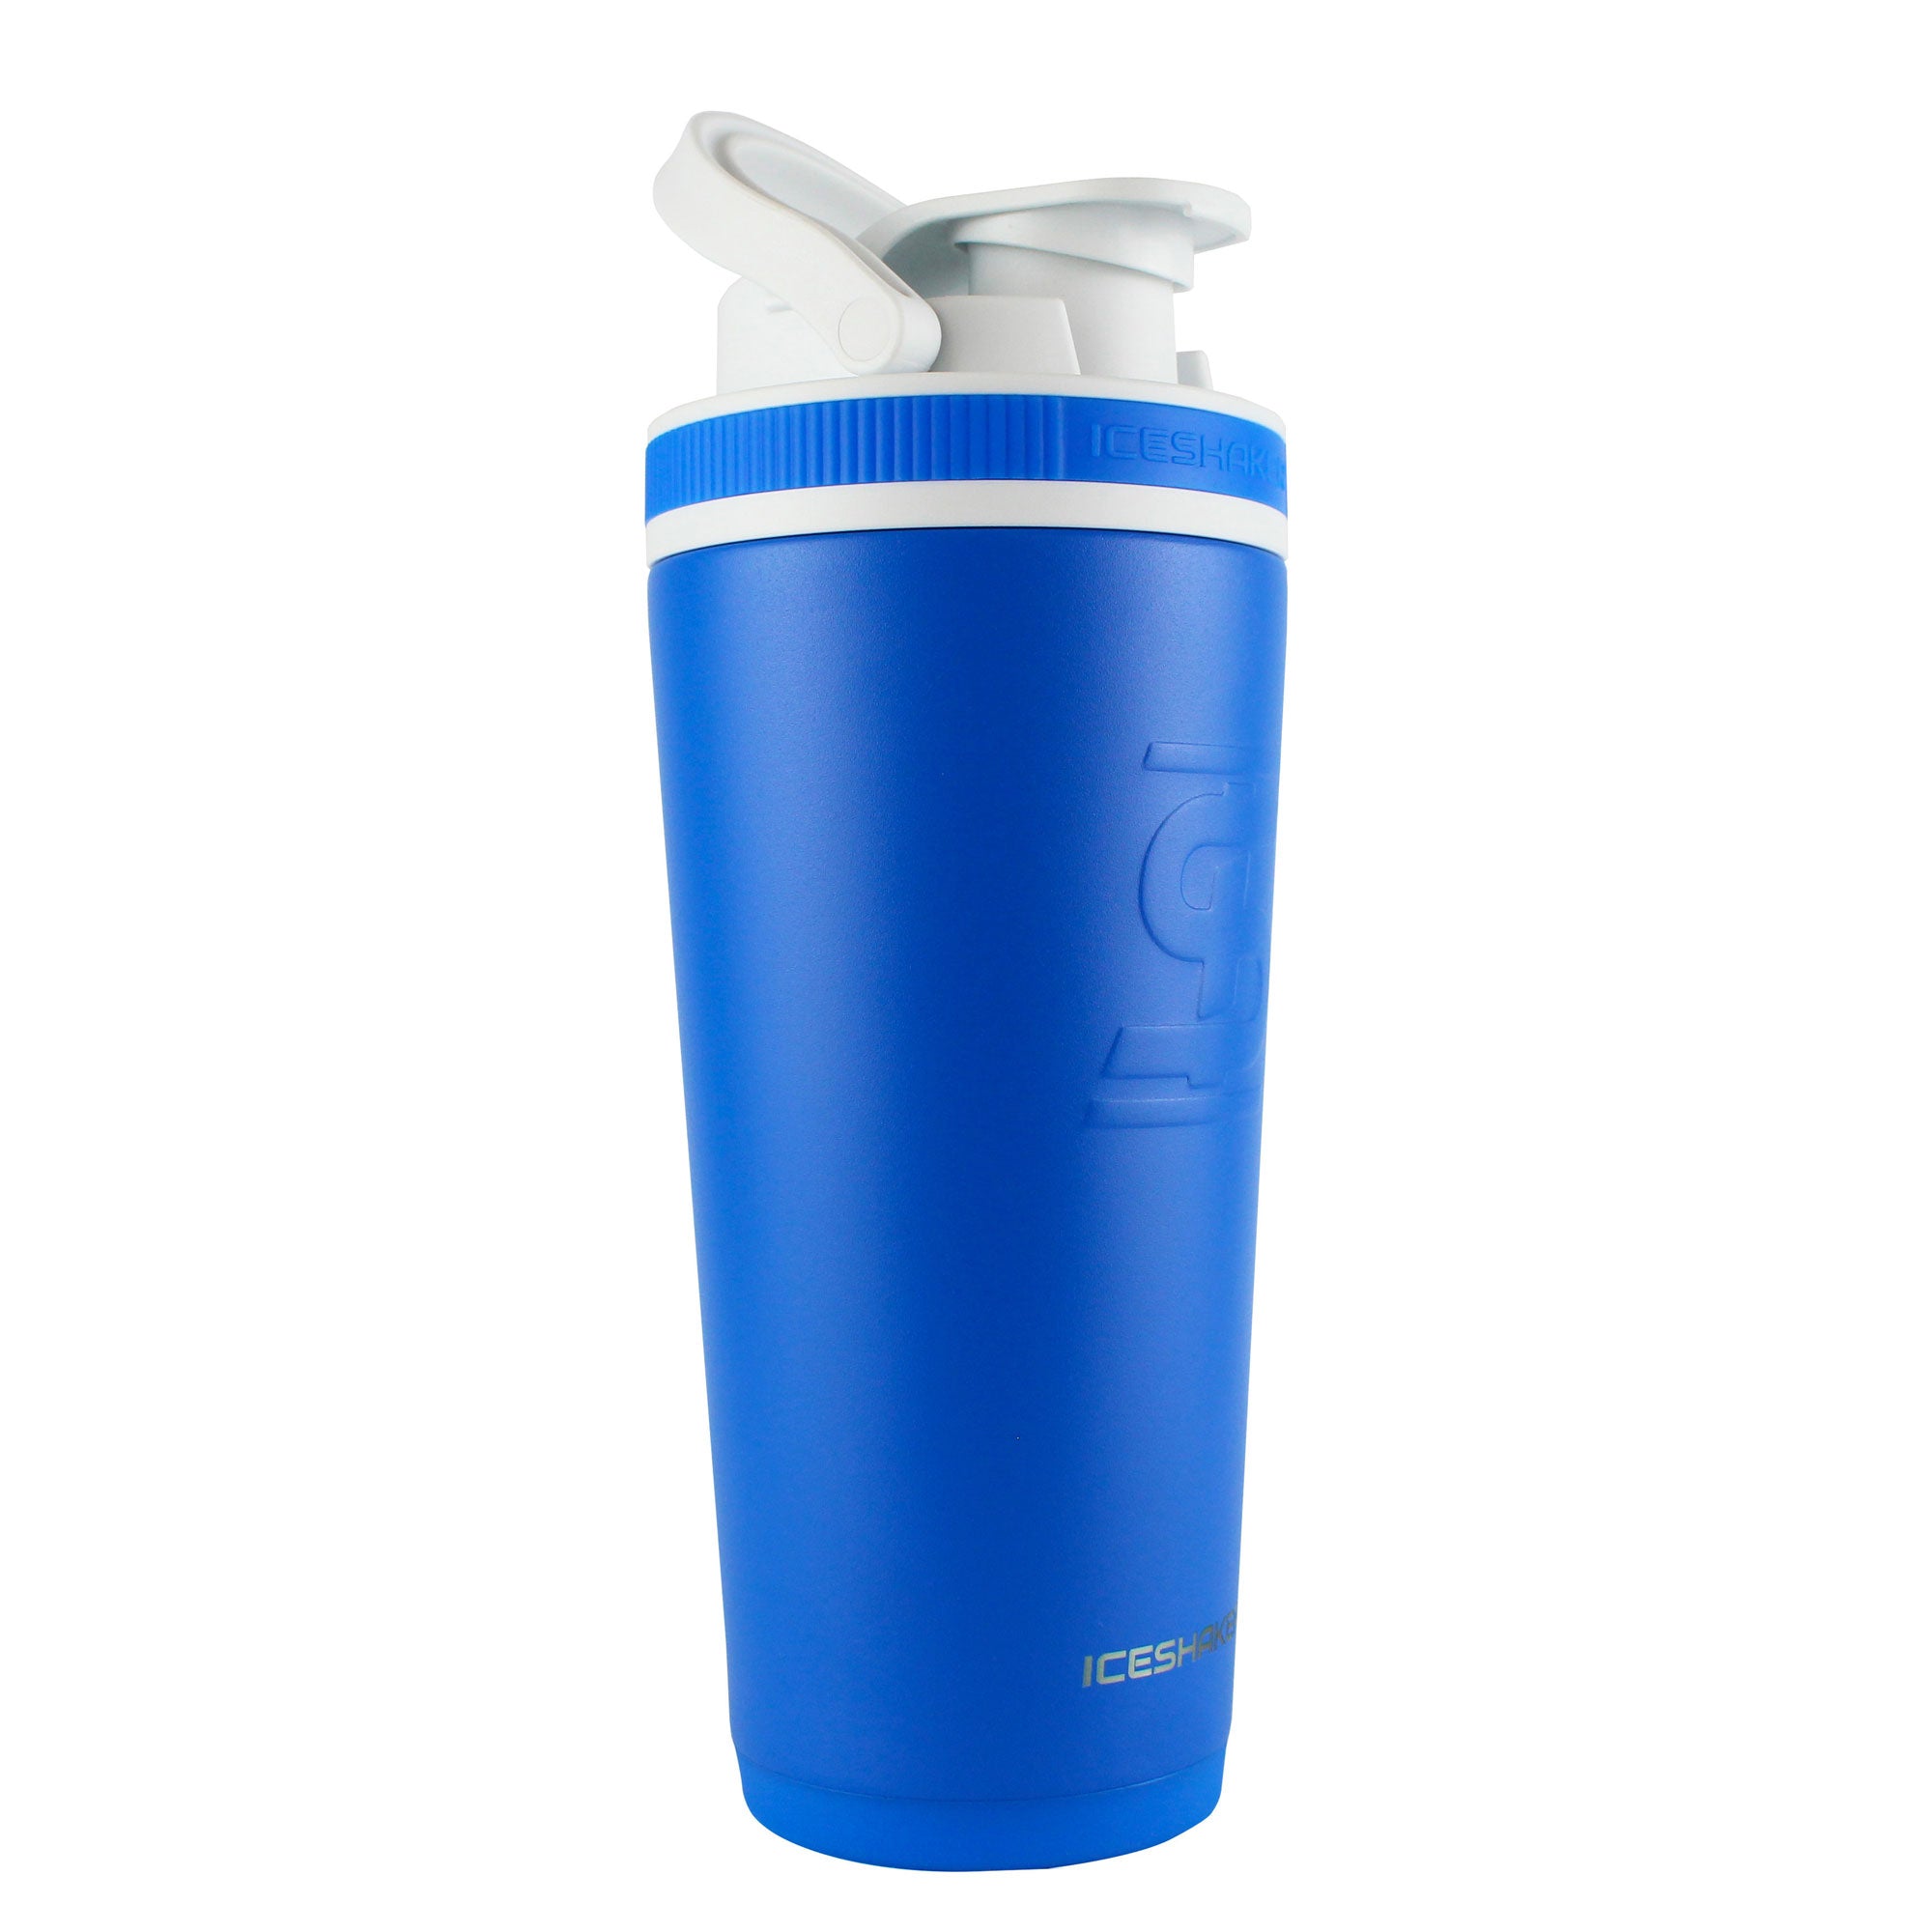 26oz IceShaker Bottle w/Built-in Shaker — Charge Fit Shop